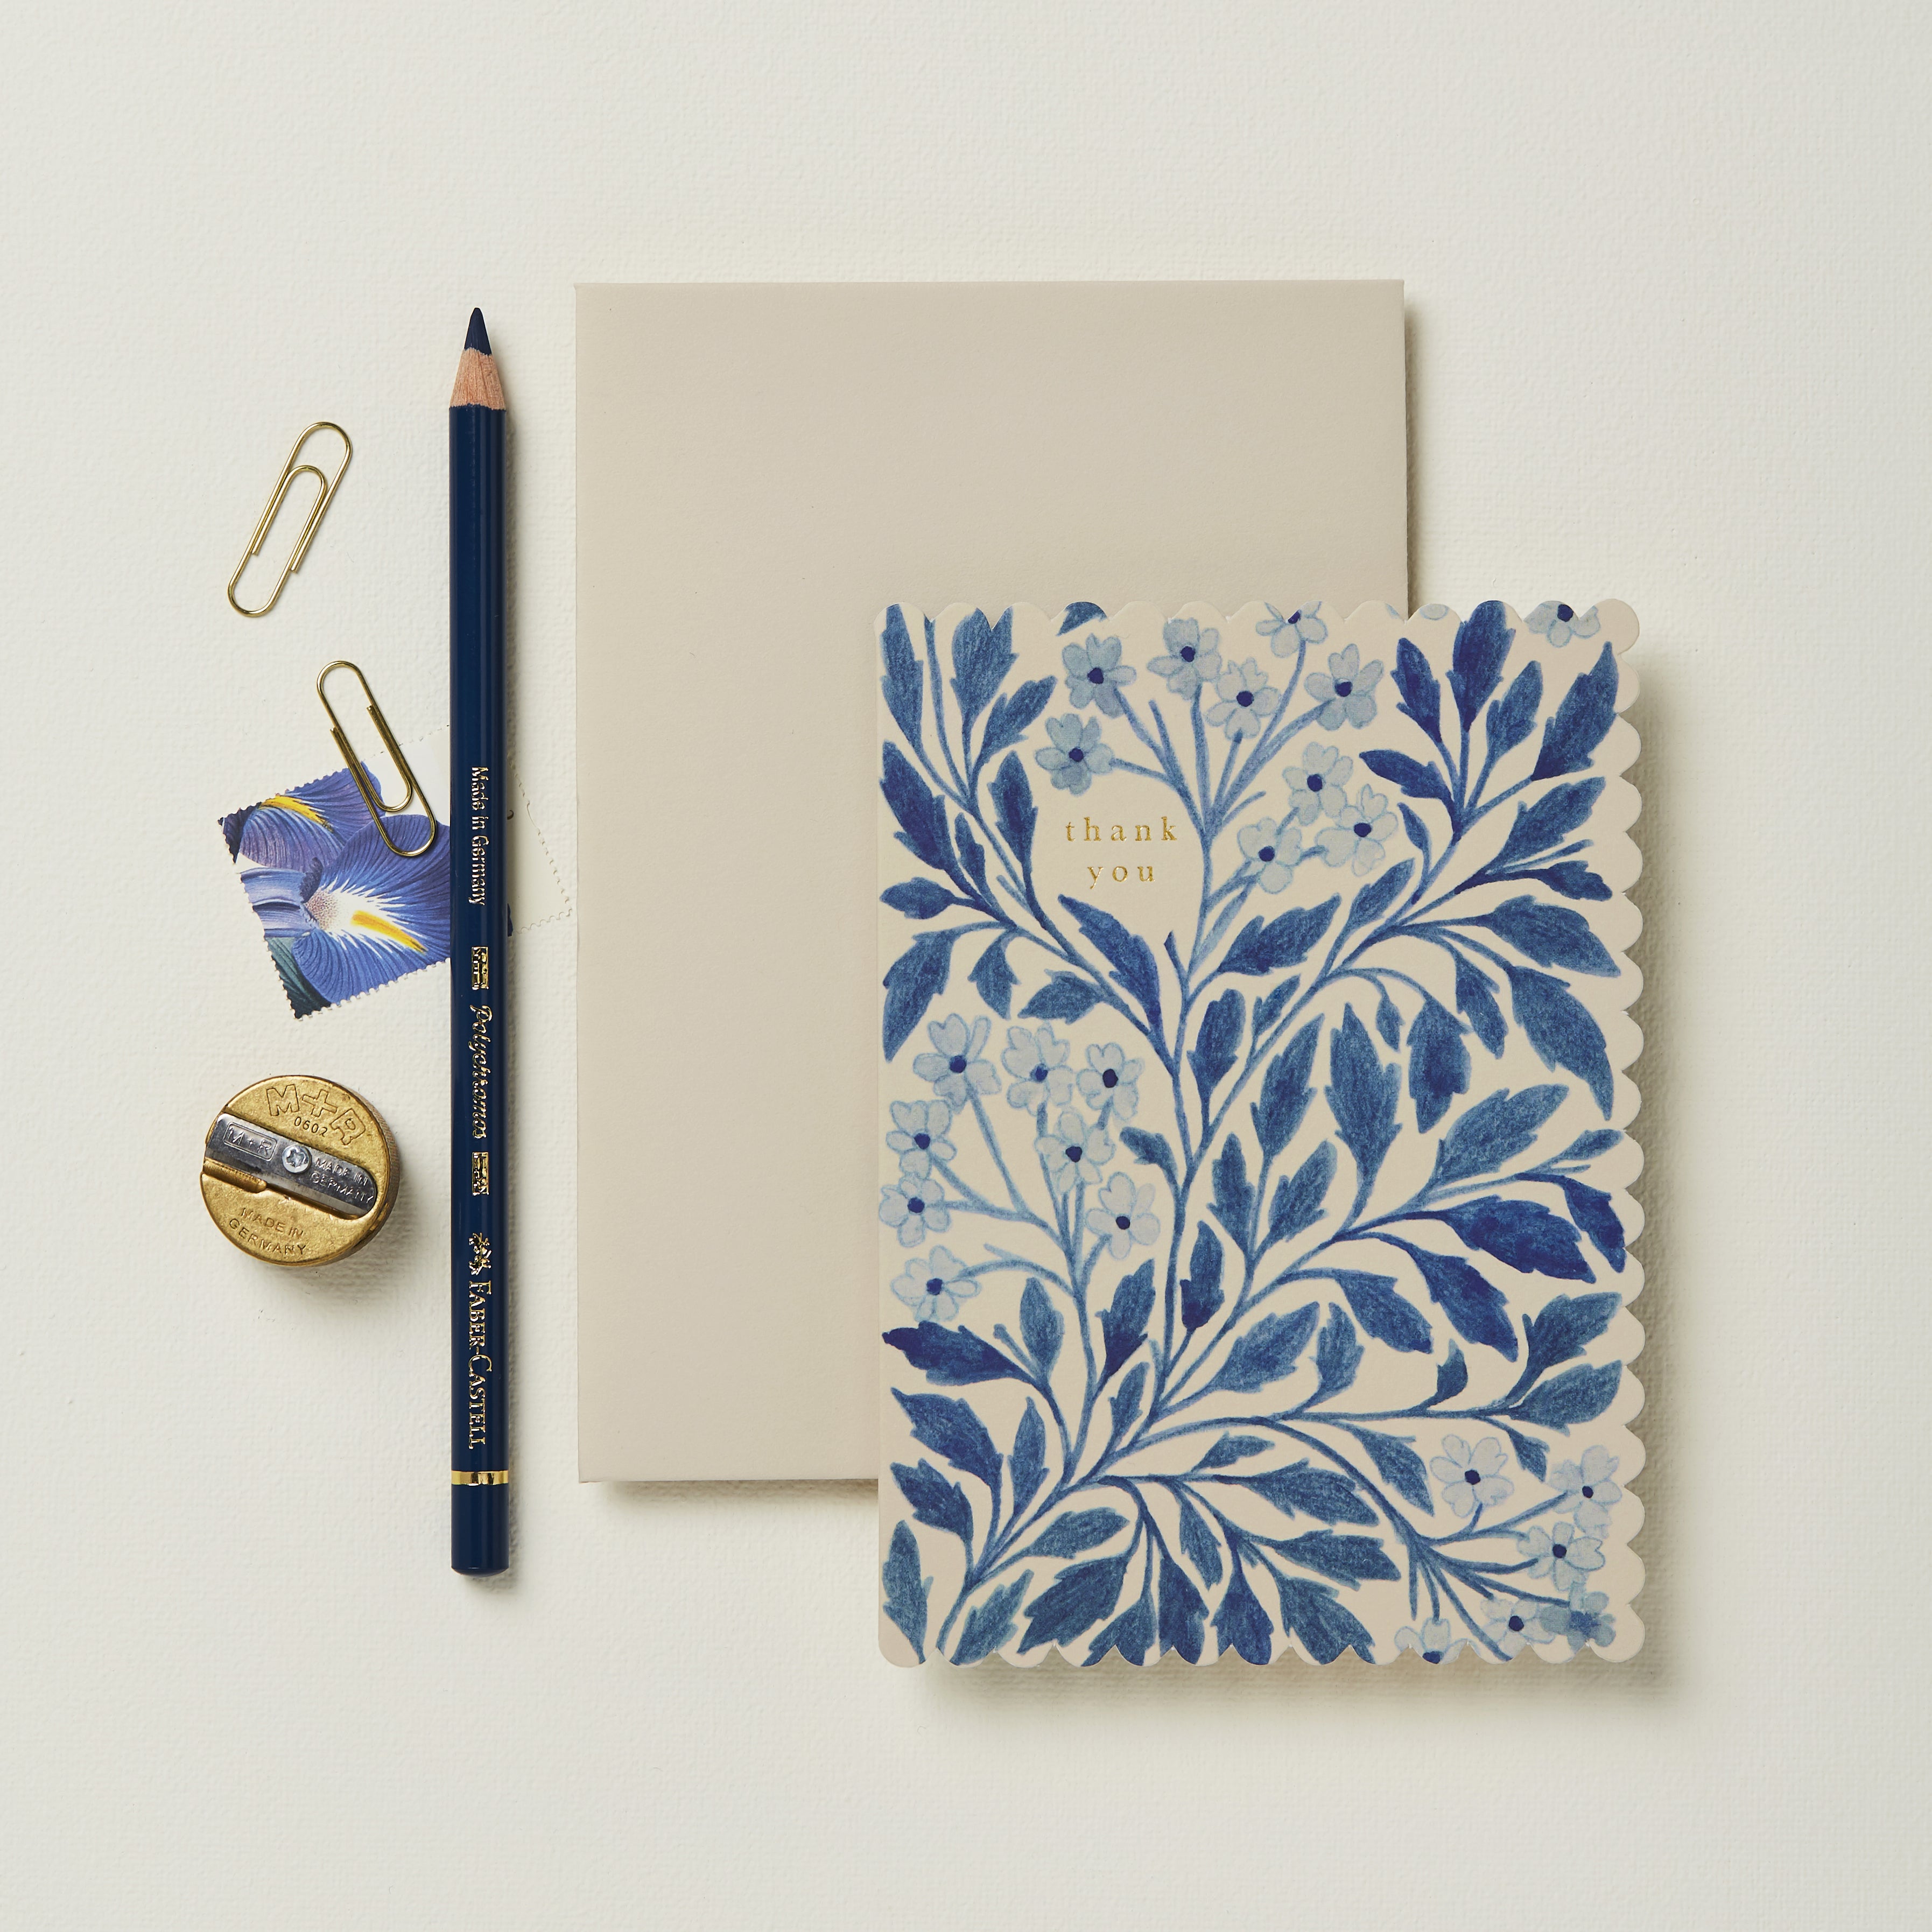 'Thank You' Blue Flora Greetings Card